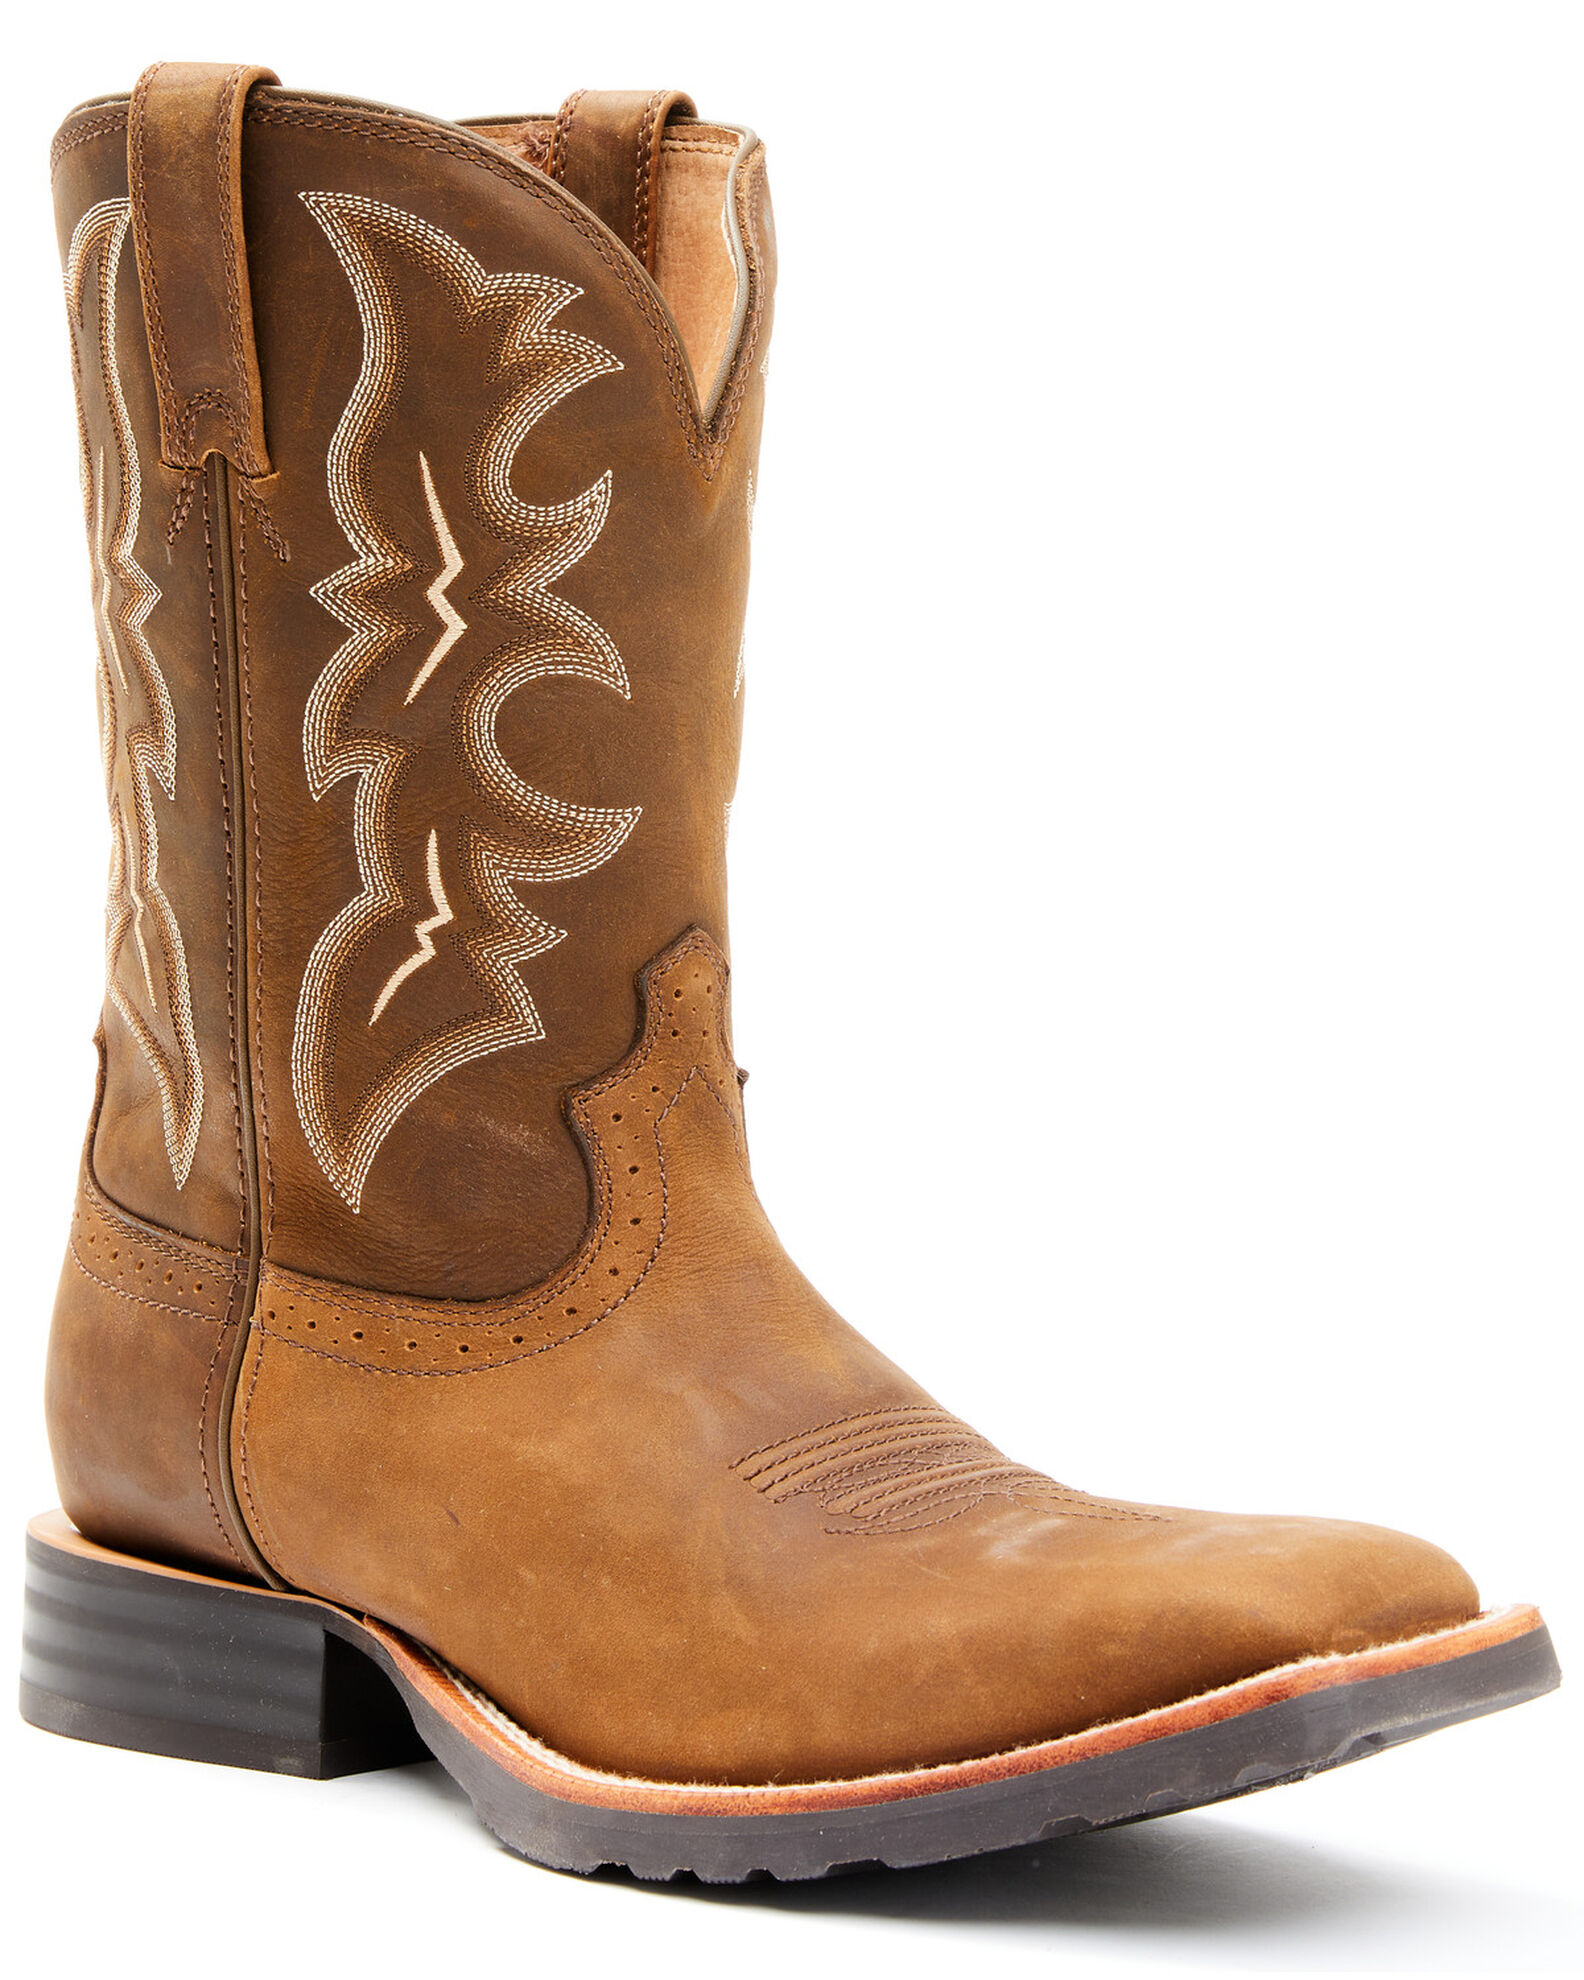 Wrangler Footwear Men's All-Around Western Boots Broad Toe - Country